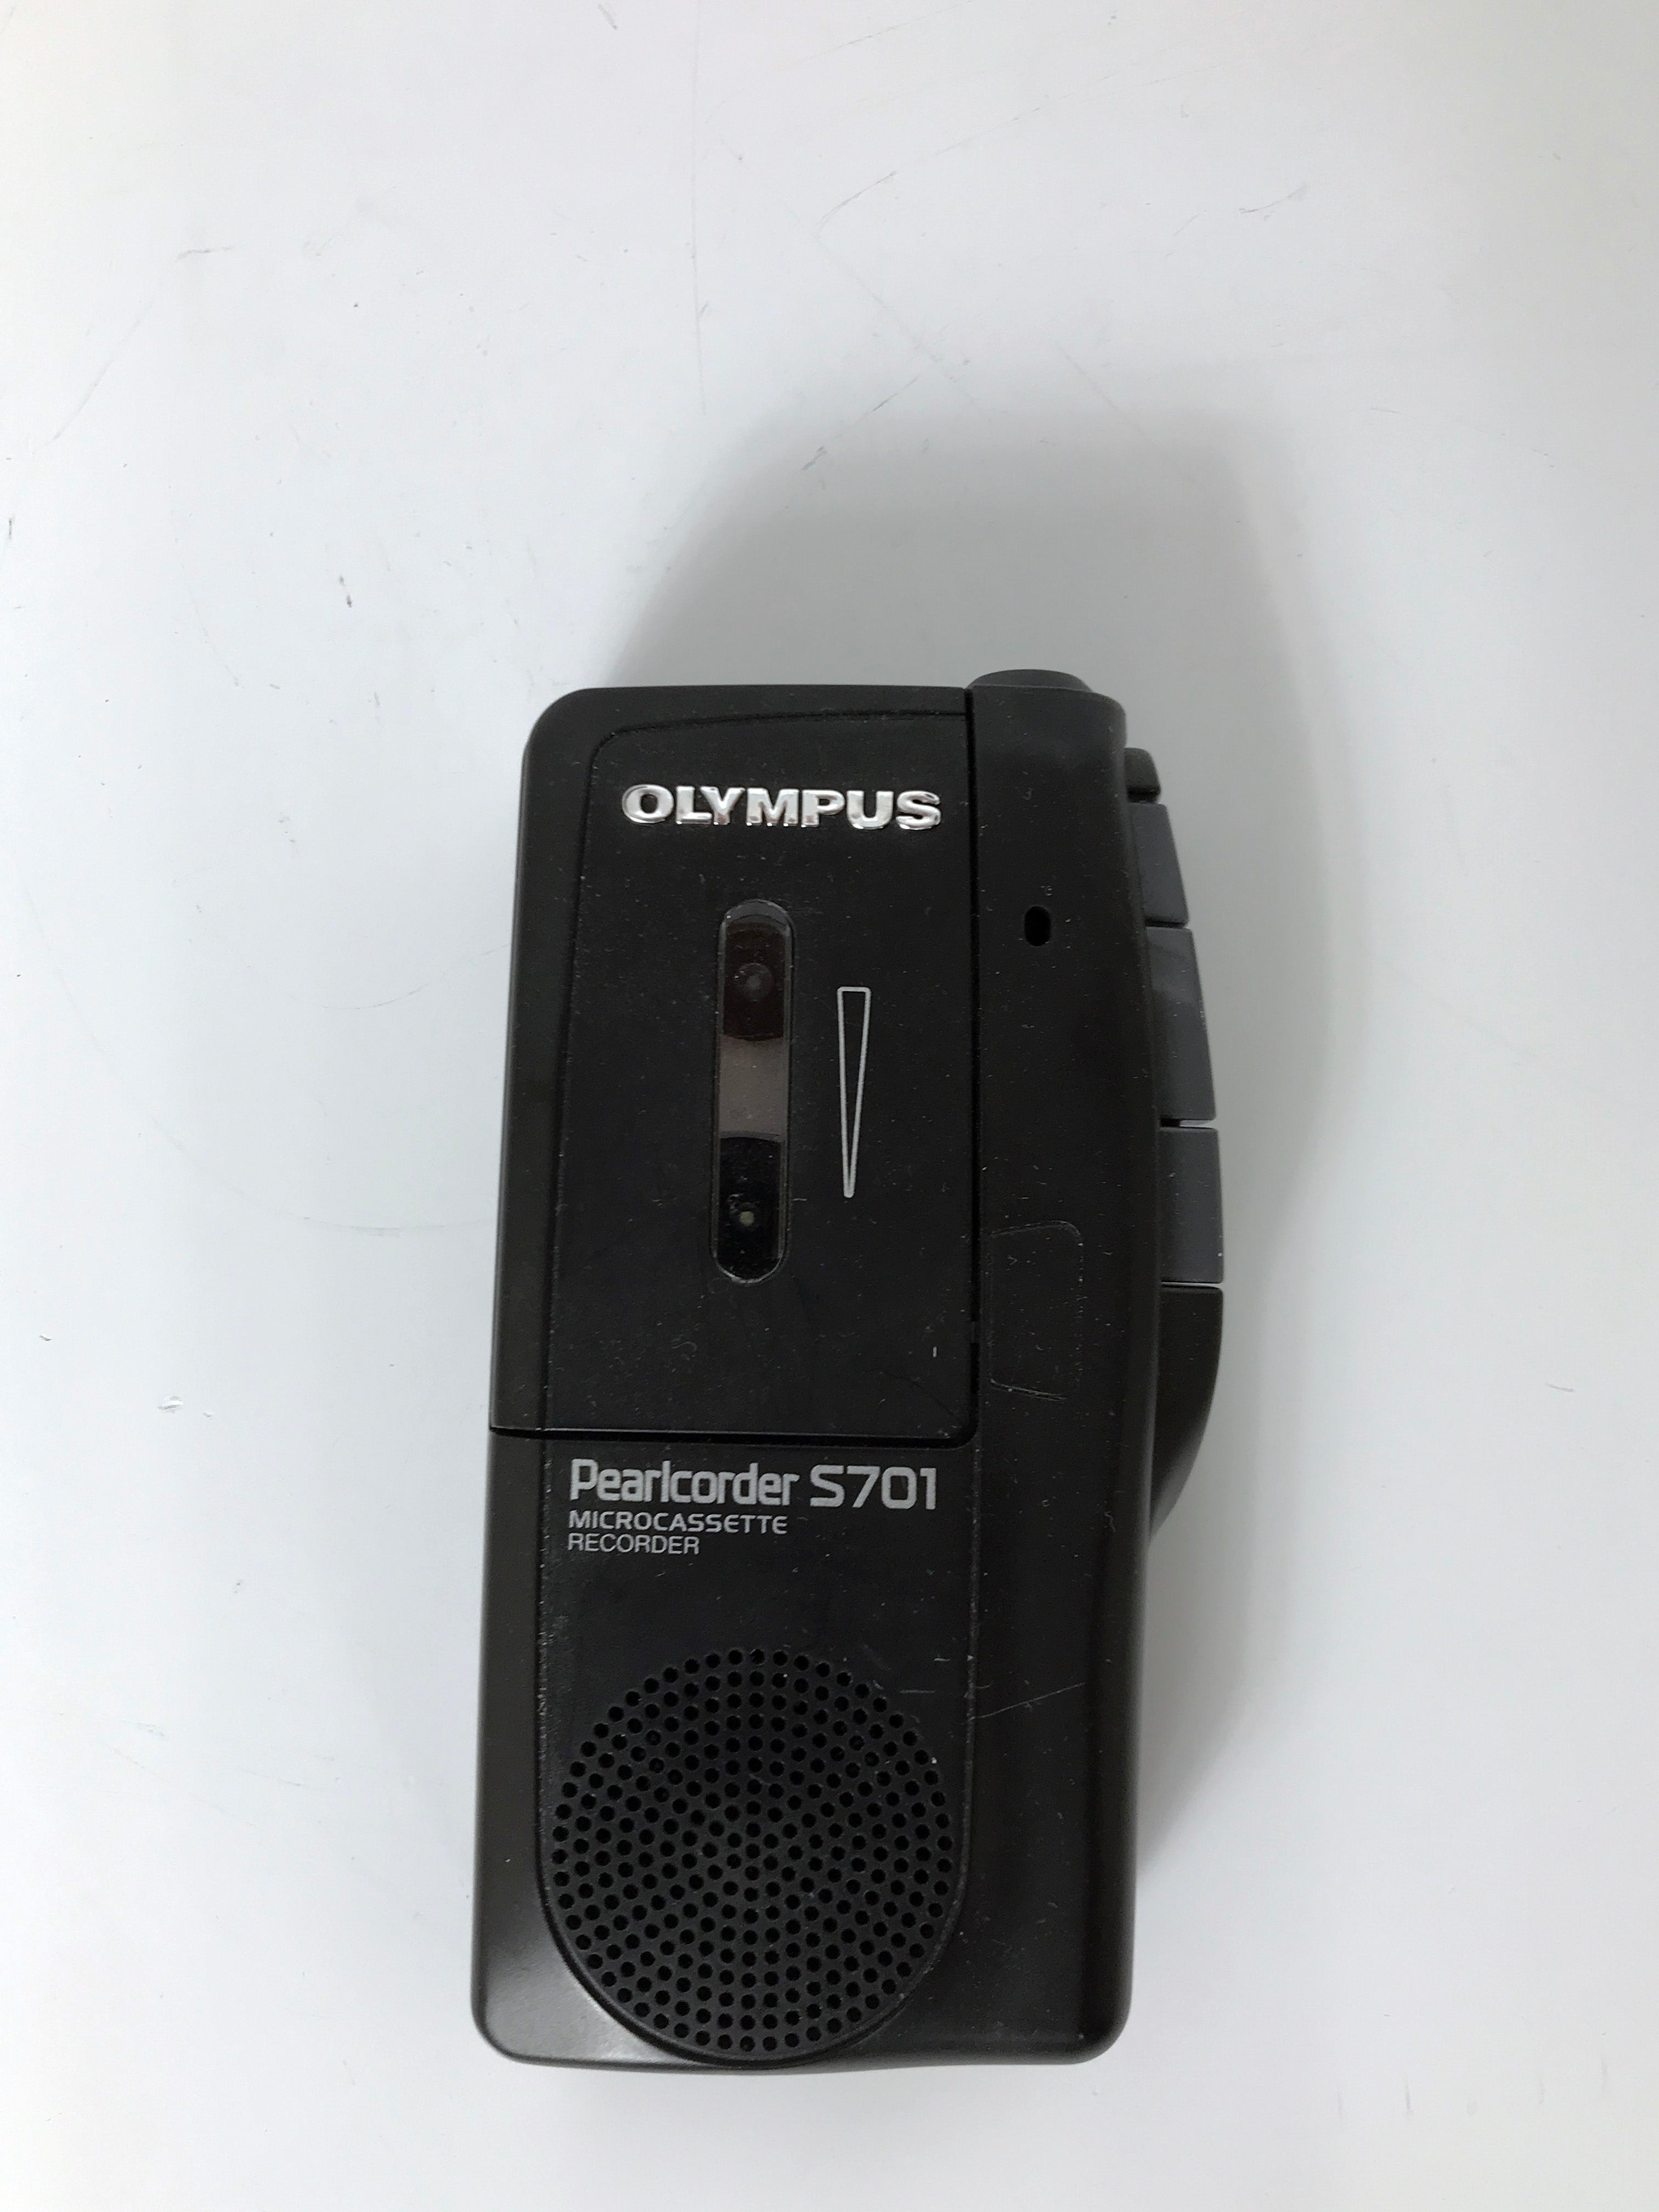 Olympus Pearlcorder S701 Microcassette Recorder